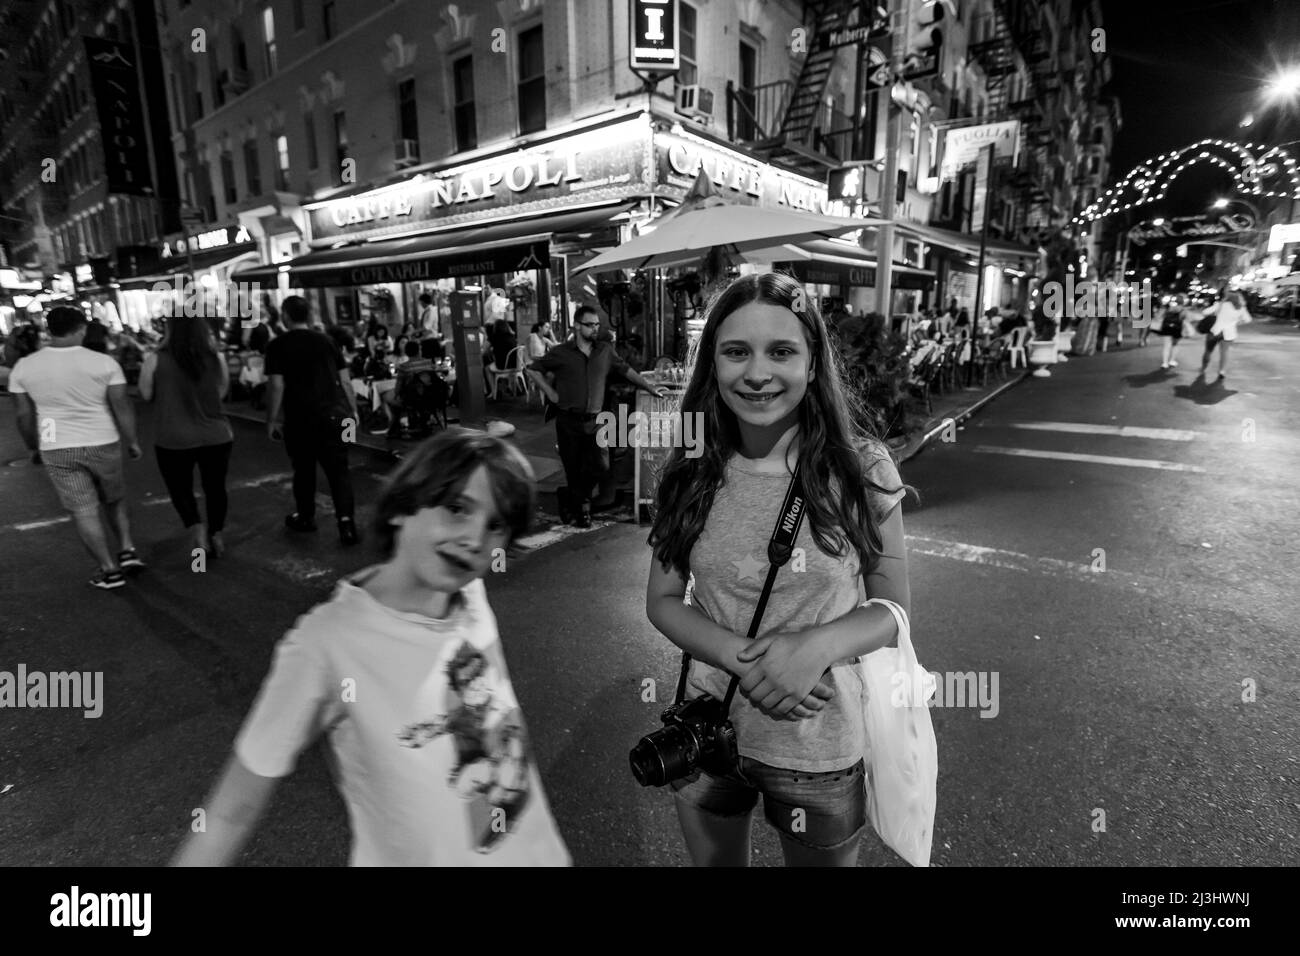 Little Italy, New York City, NY, USA, 14 years old caucasian teenager girl and 12 years old caucasian teenager boy - both with brown hair and summer styling in Little Italy Stock Photo